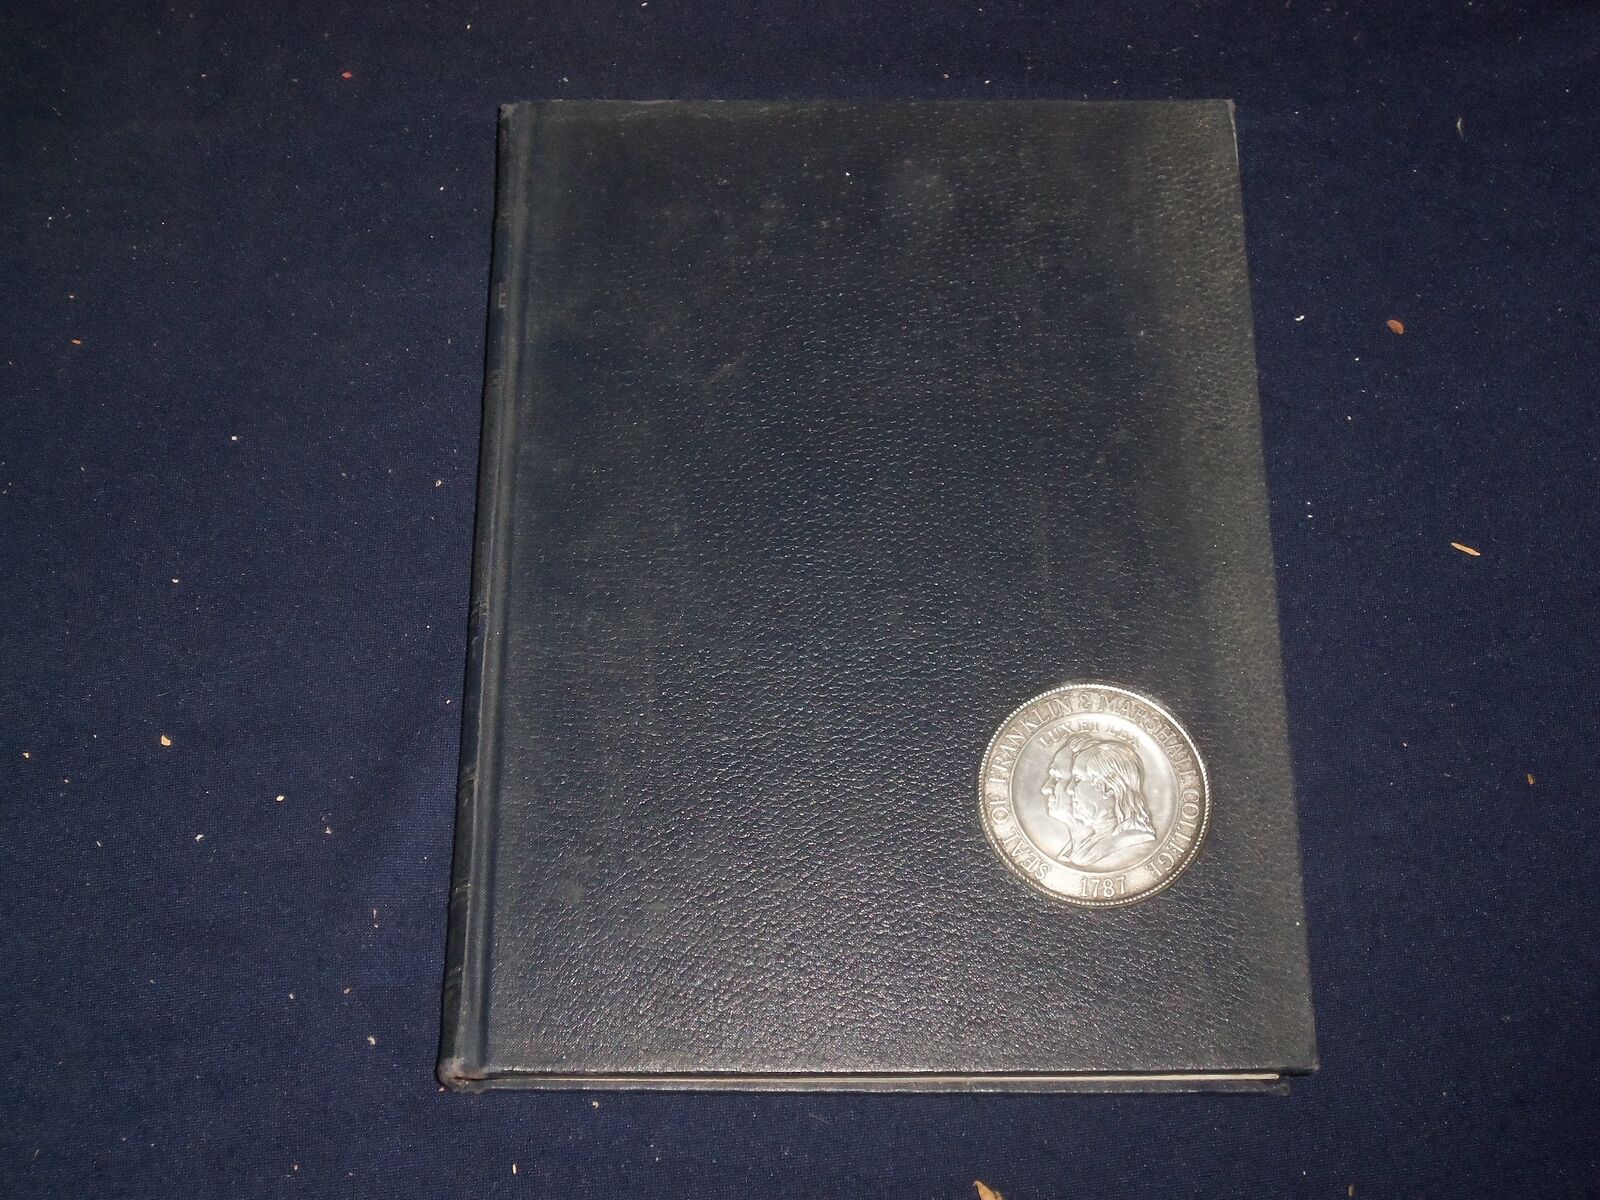 1966 ORIFLAMME FRANKLIN AND MARSHALL COLLEGE YEARBOOK - LANCASTER, PA - YB 1950